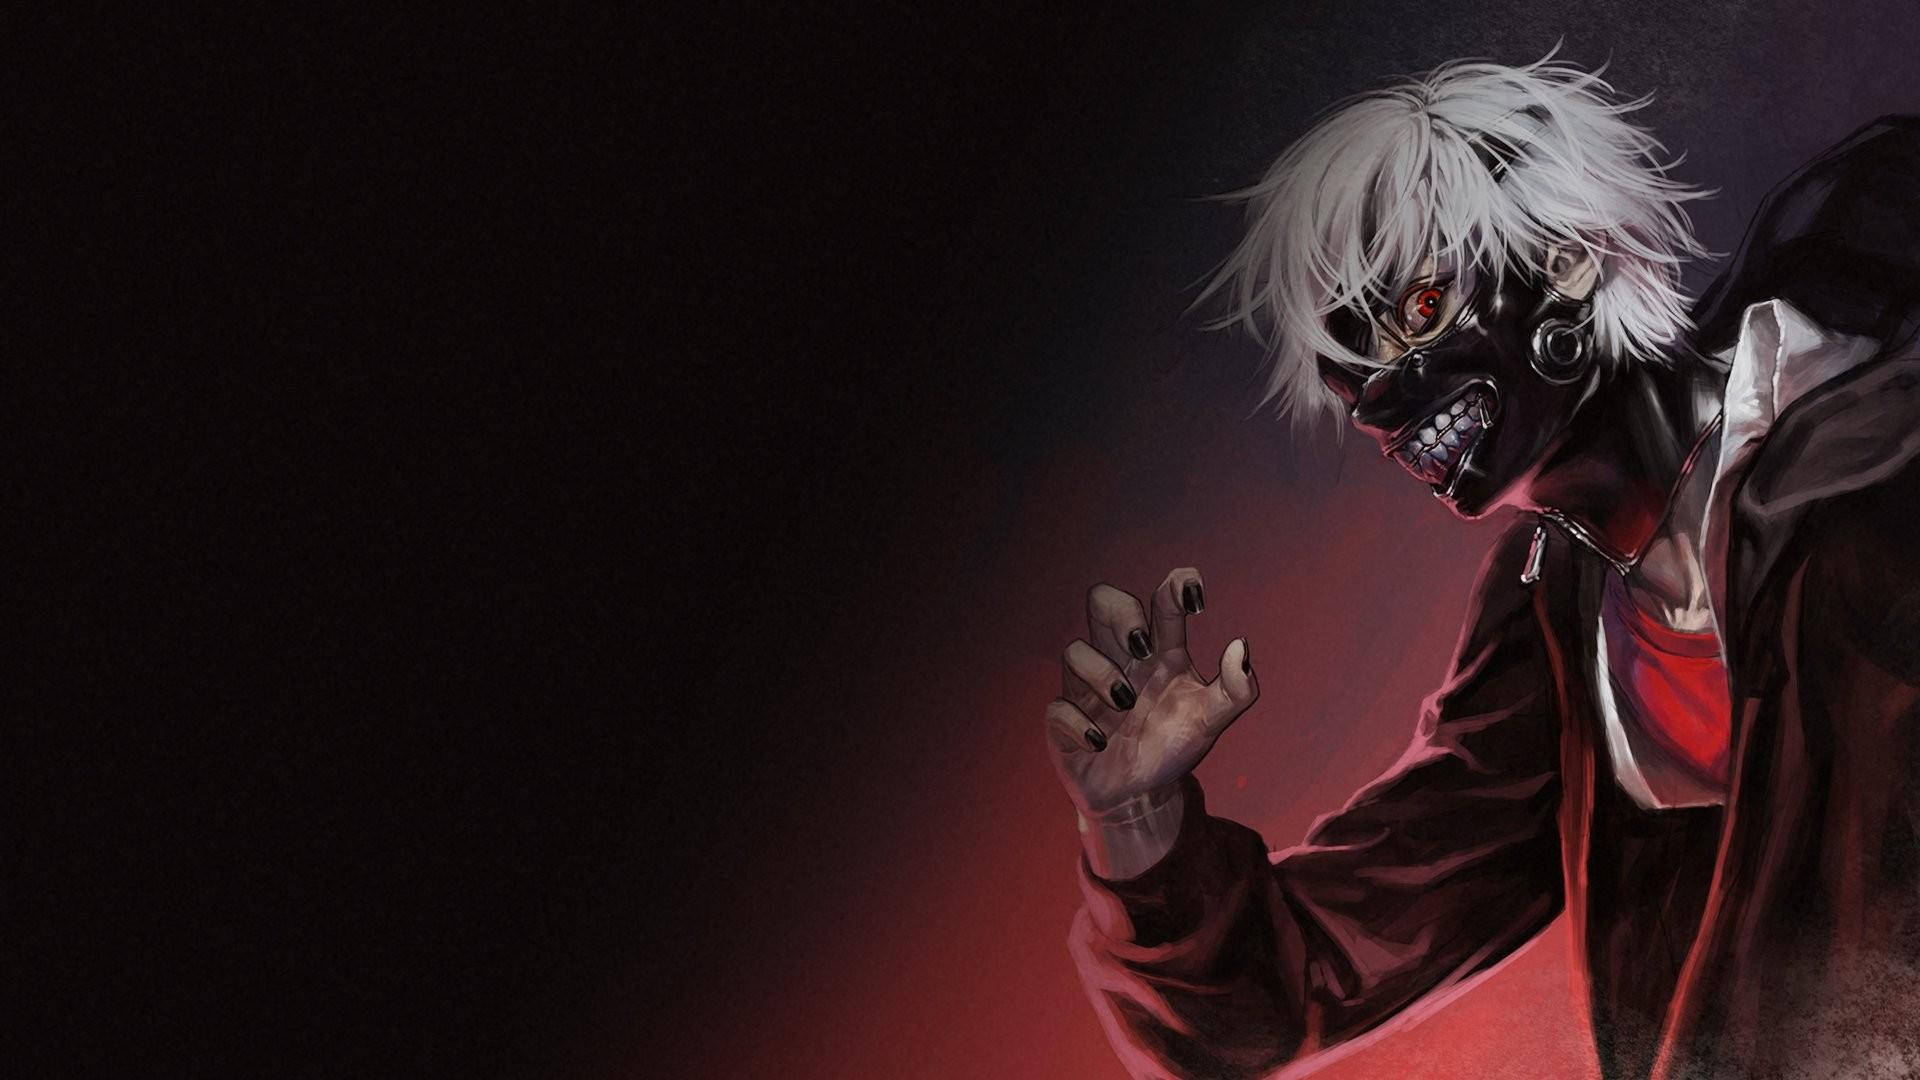 5 Creepy Anime Wallpapers for iPhone and Android by Amy Barrett